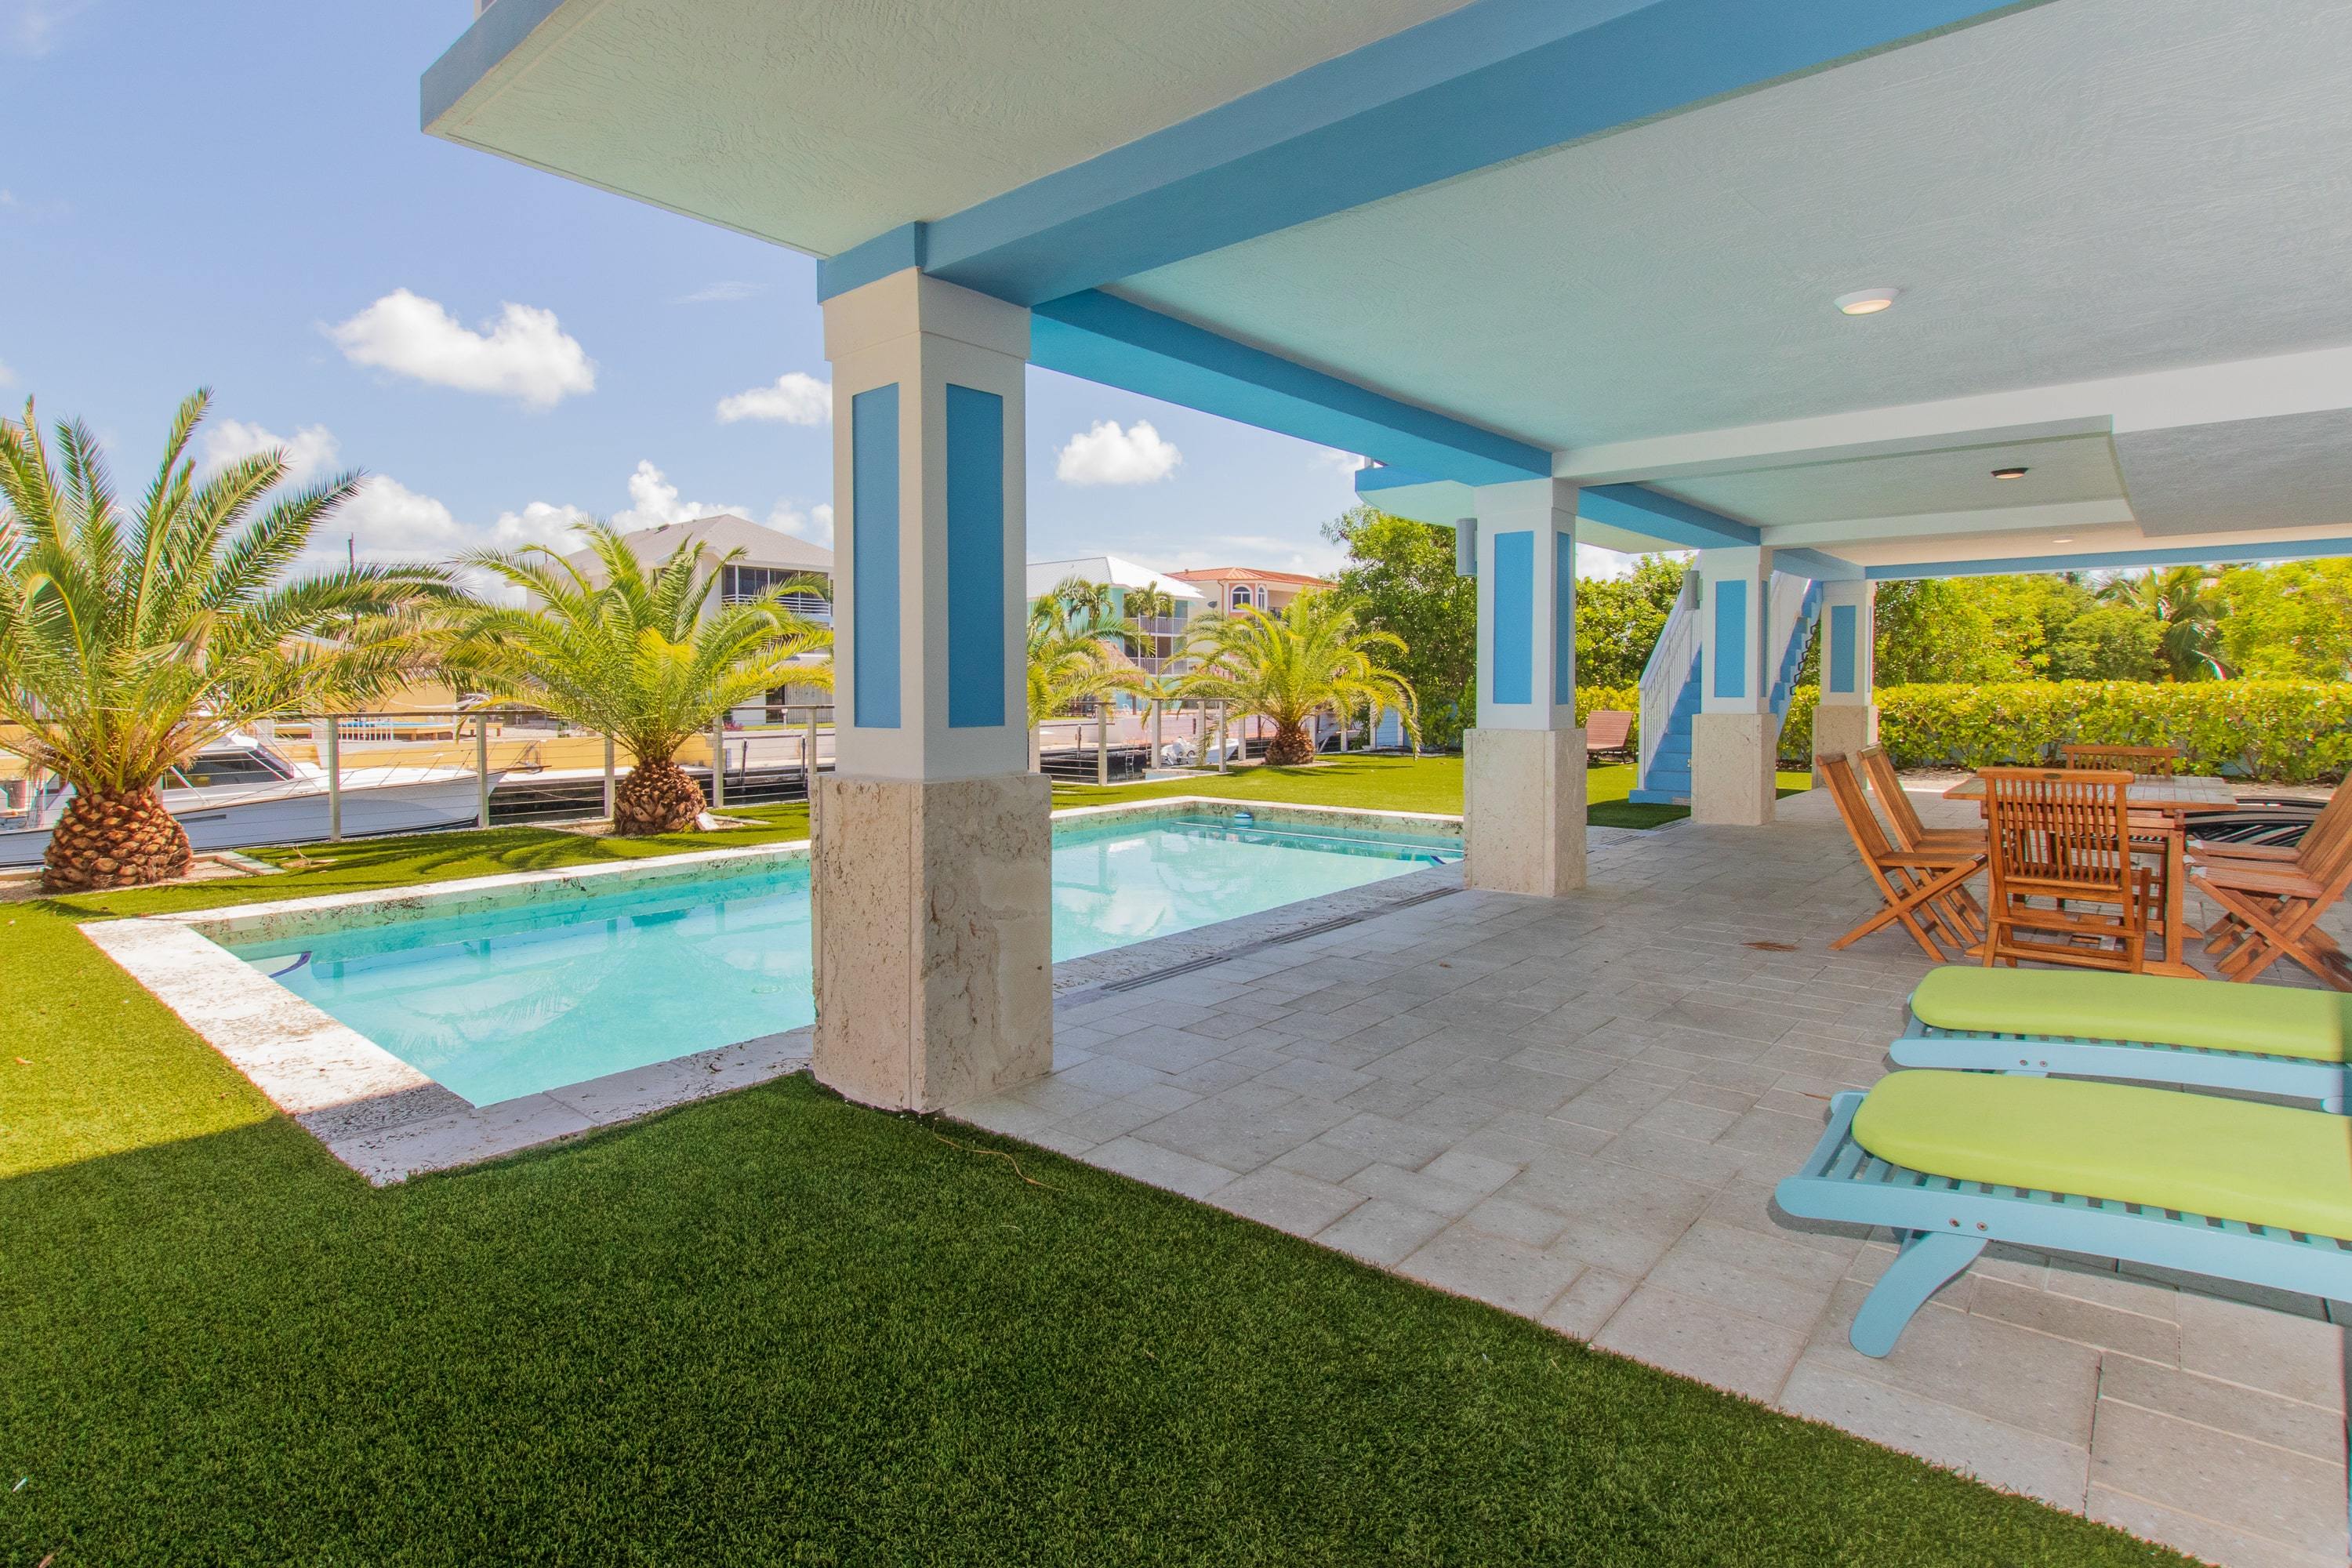 View of in-ground pool in luxury, Florida Keys backyard with canal access